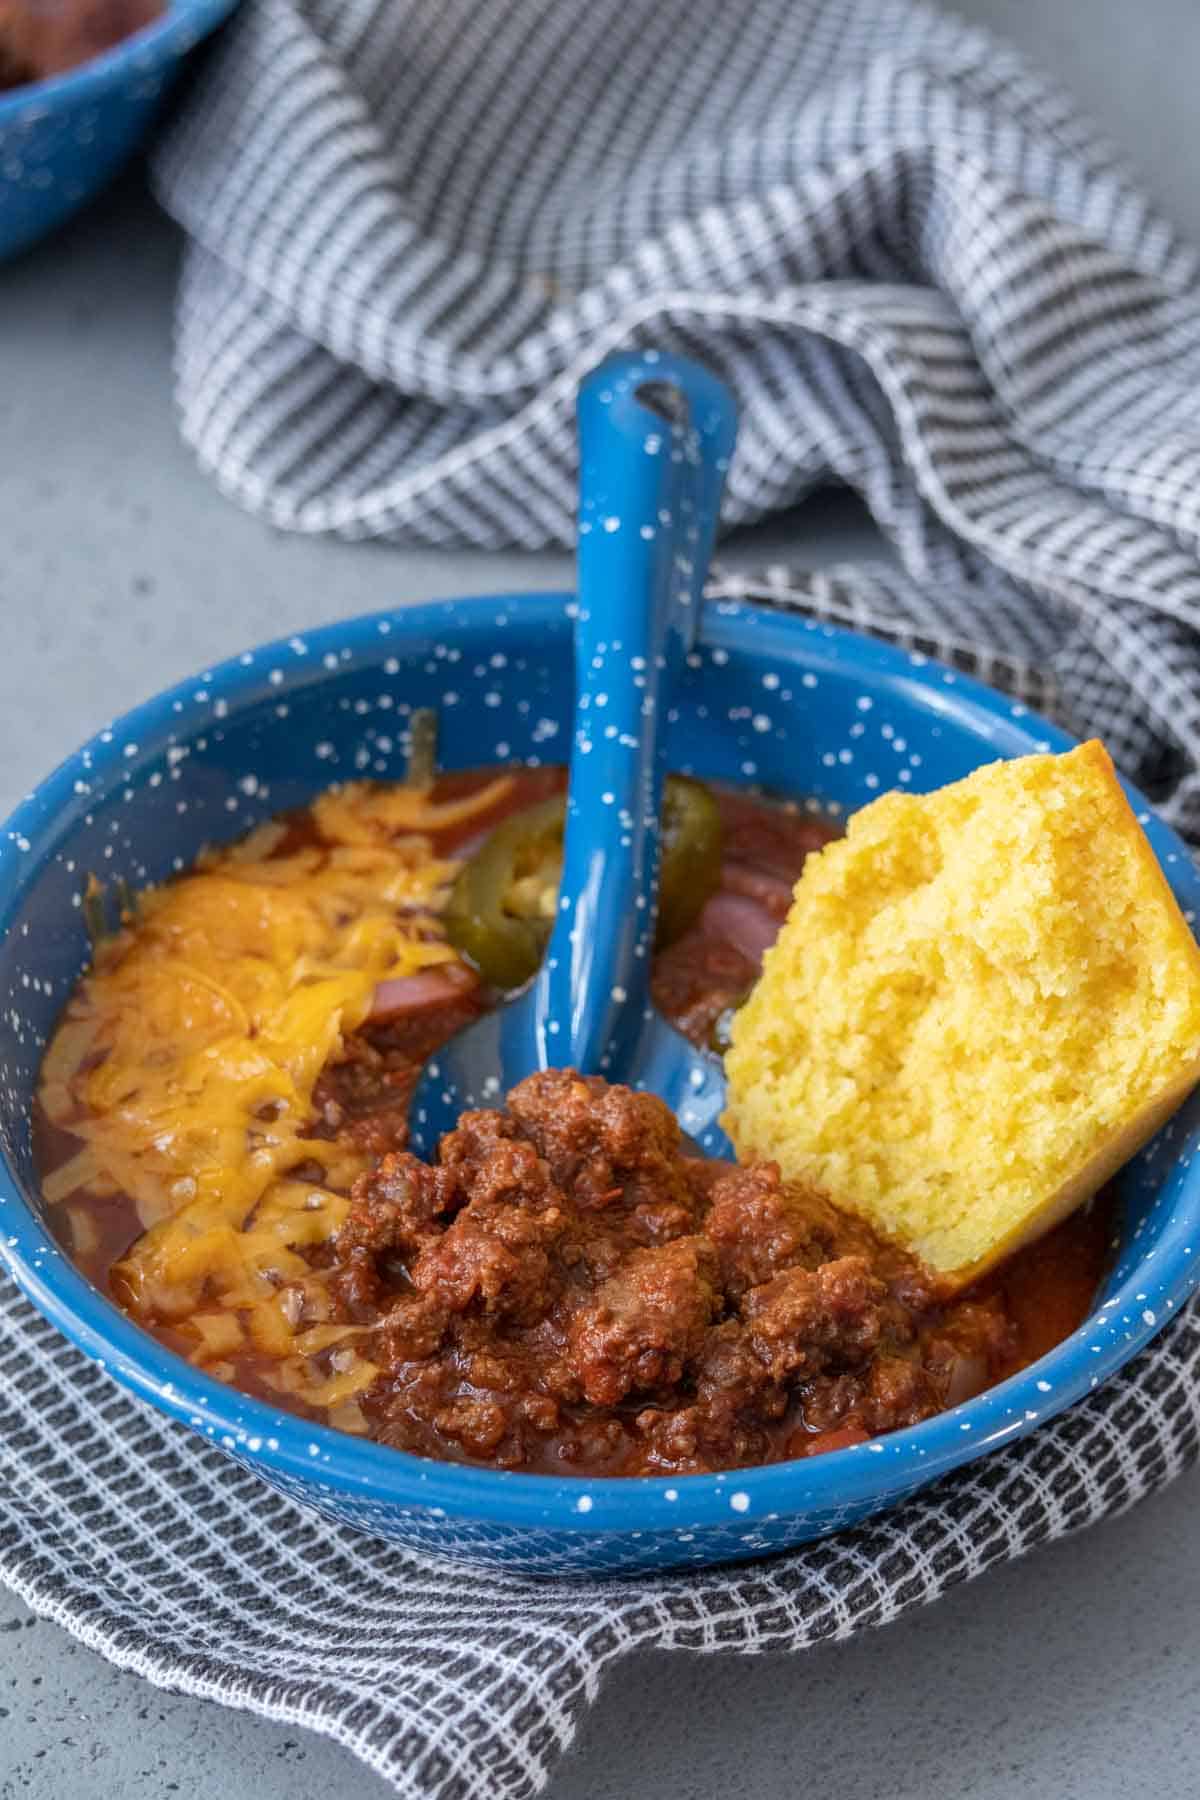 Bison chili in a blue bowl with a corn muffin half on top.